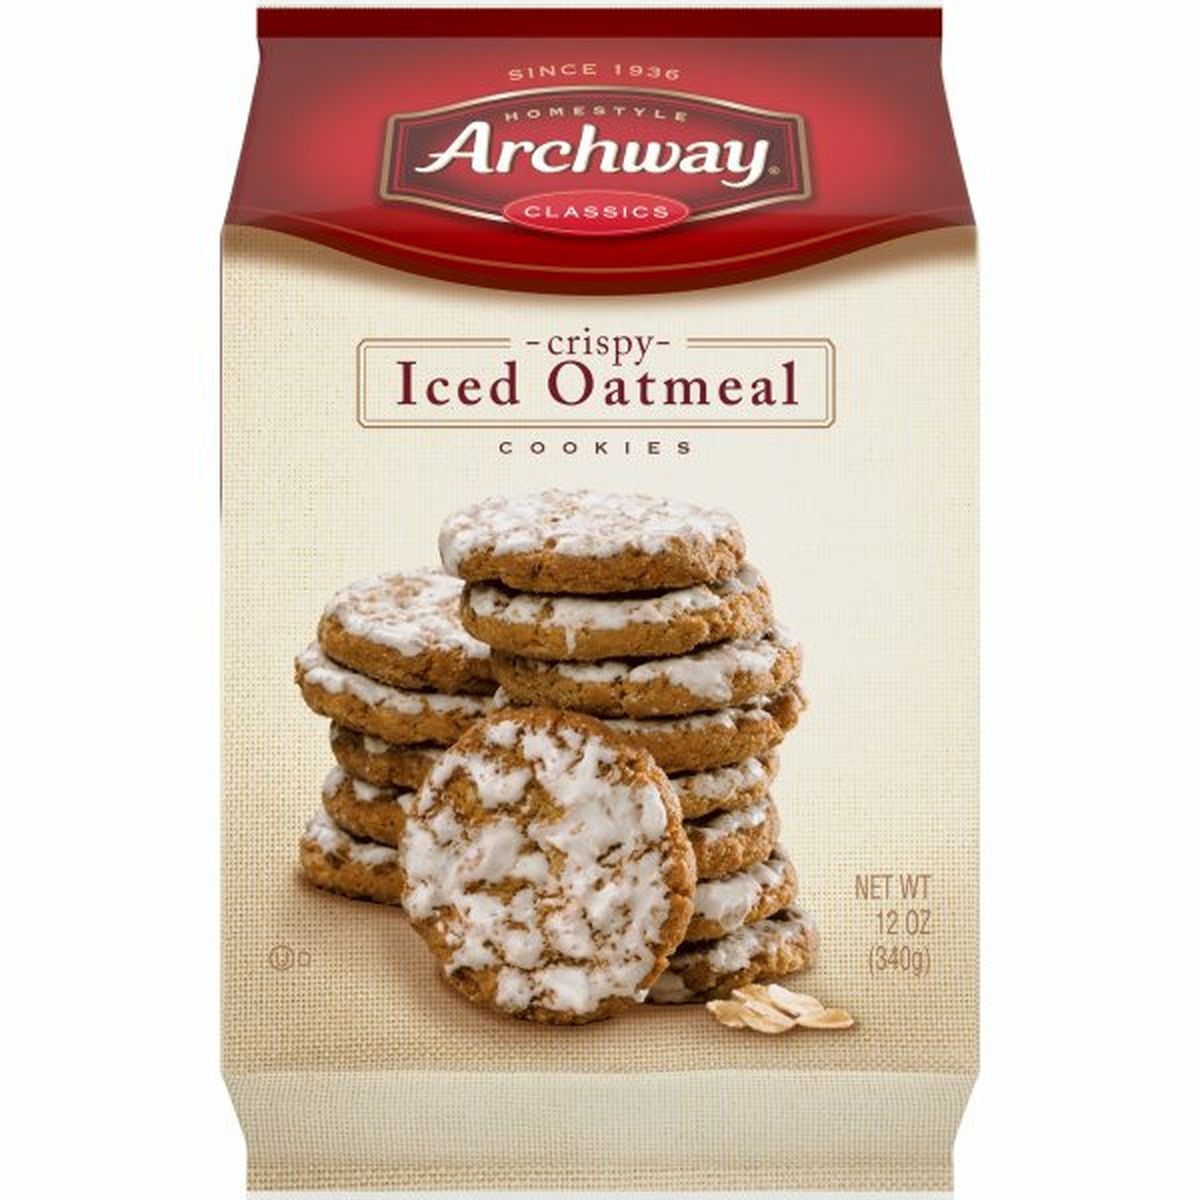 Calories in Archways Cookies, Iced Oatmeal, Crispy